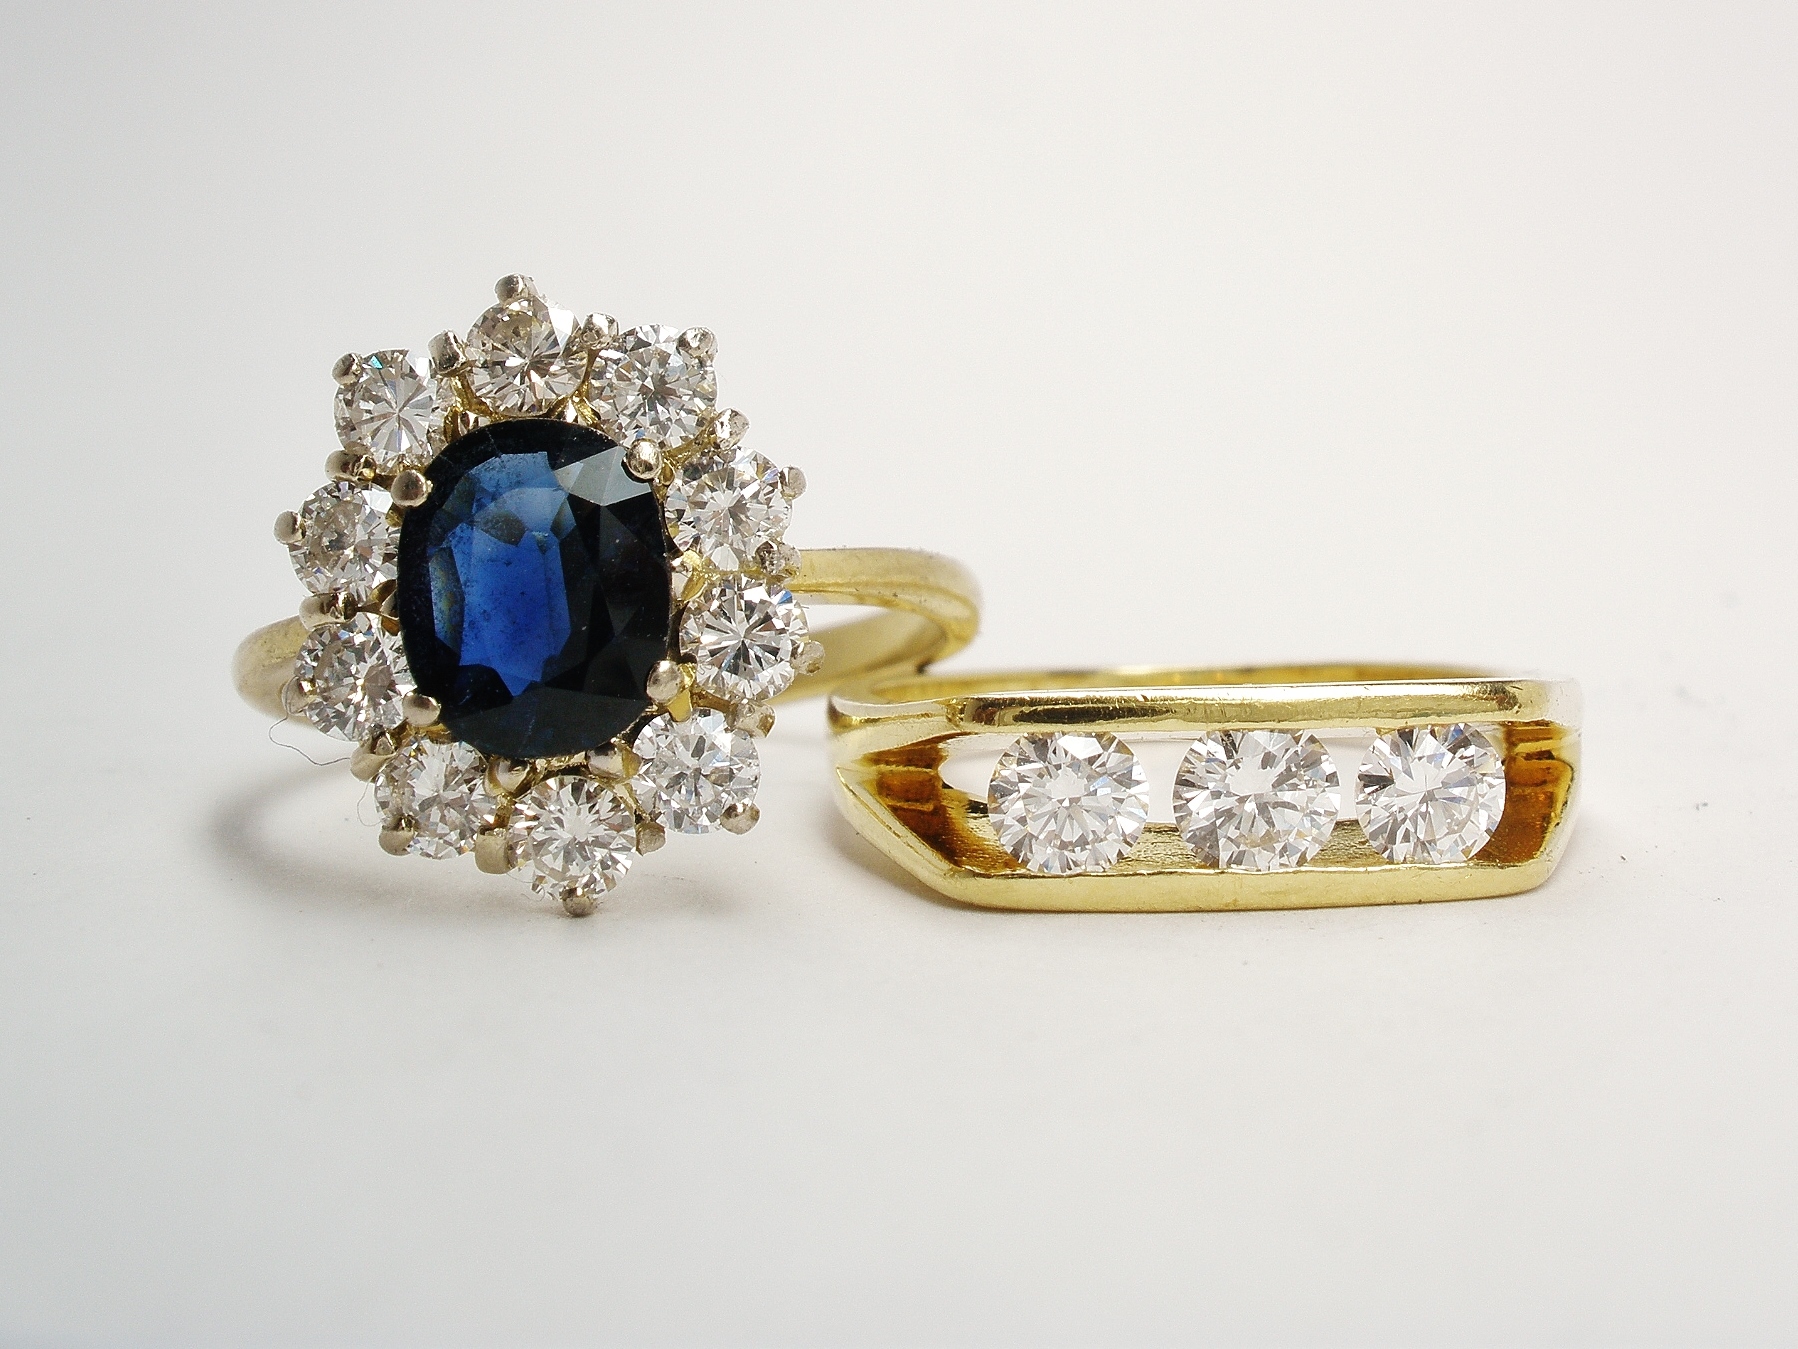 A 3 stone round brilliant cut diamond ring and an 11 stone oval sapphire and diamond cluster. Only the diamonds were to be used.